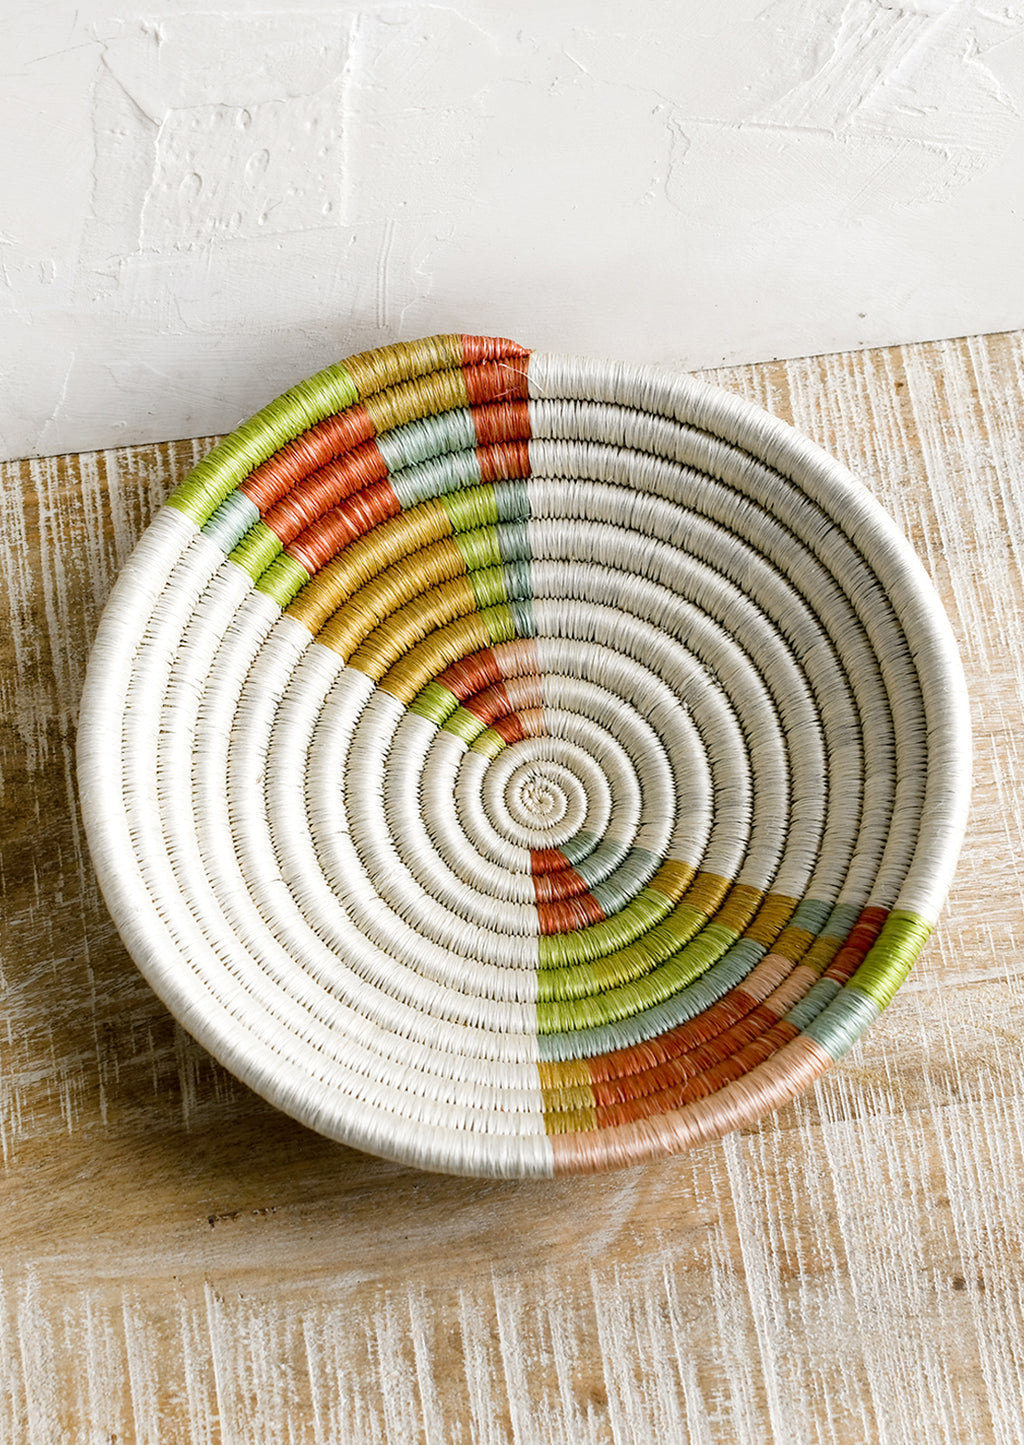 Small: A woven sweetgrass bowl in white with multicolor geometric design.